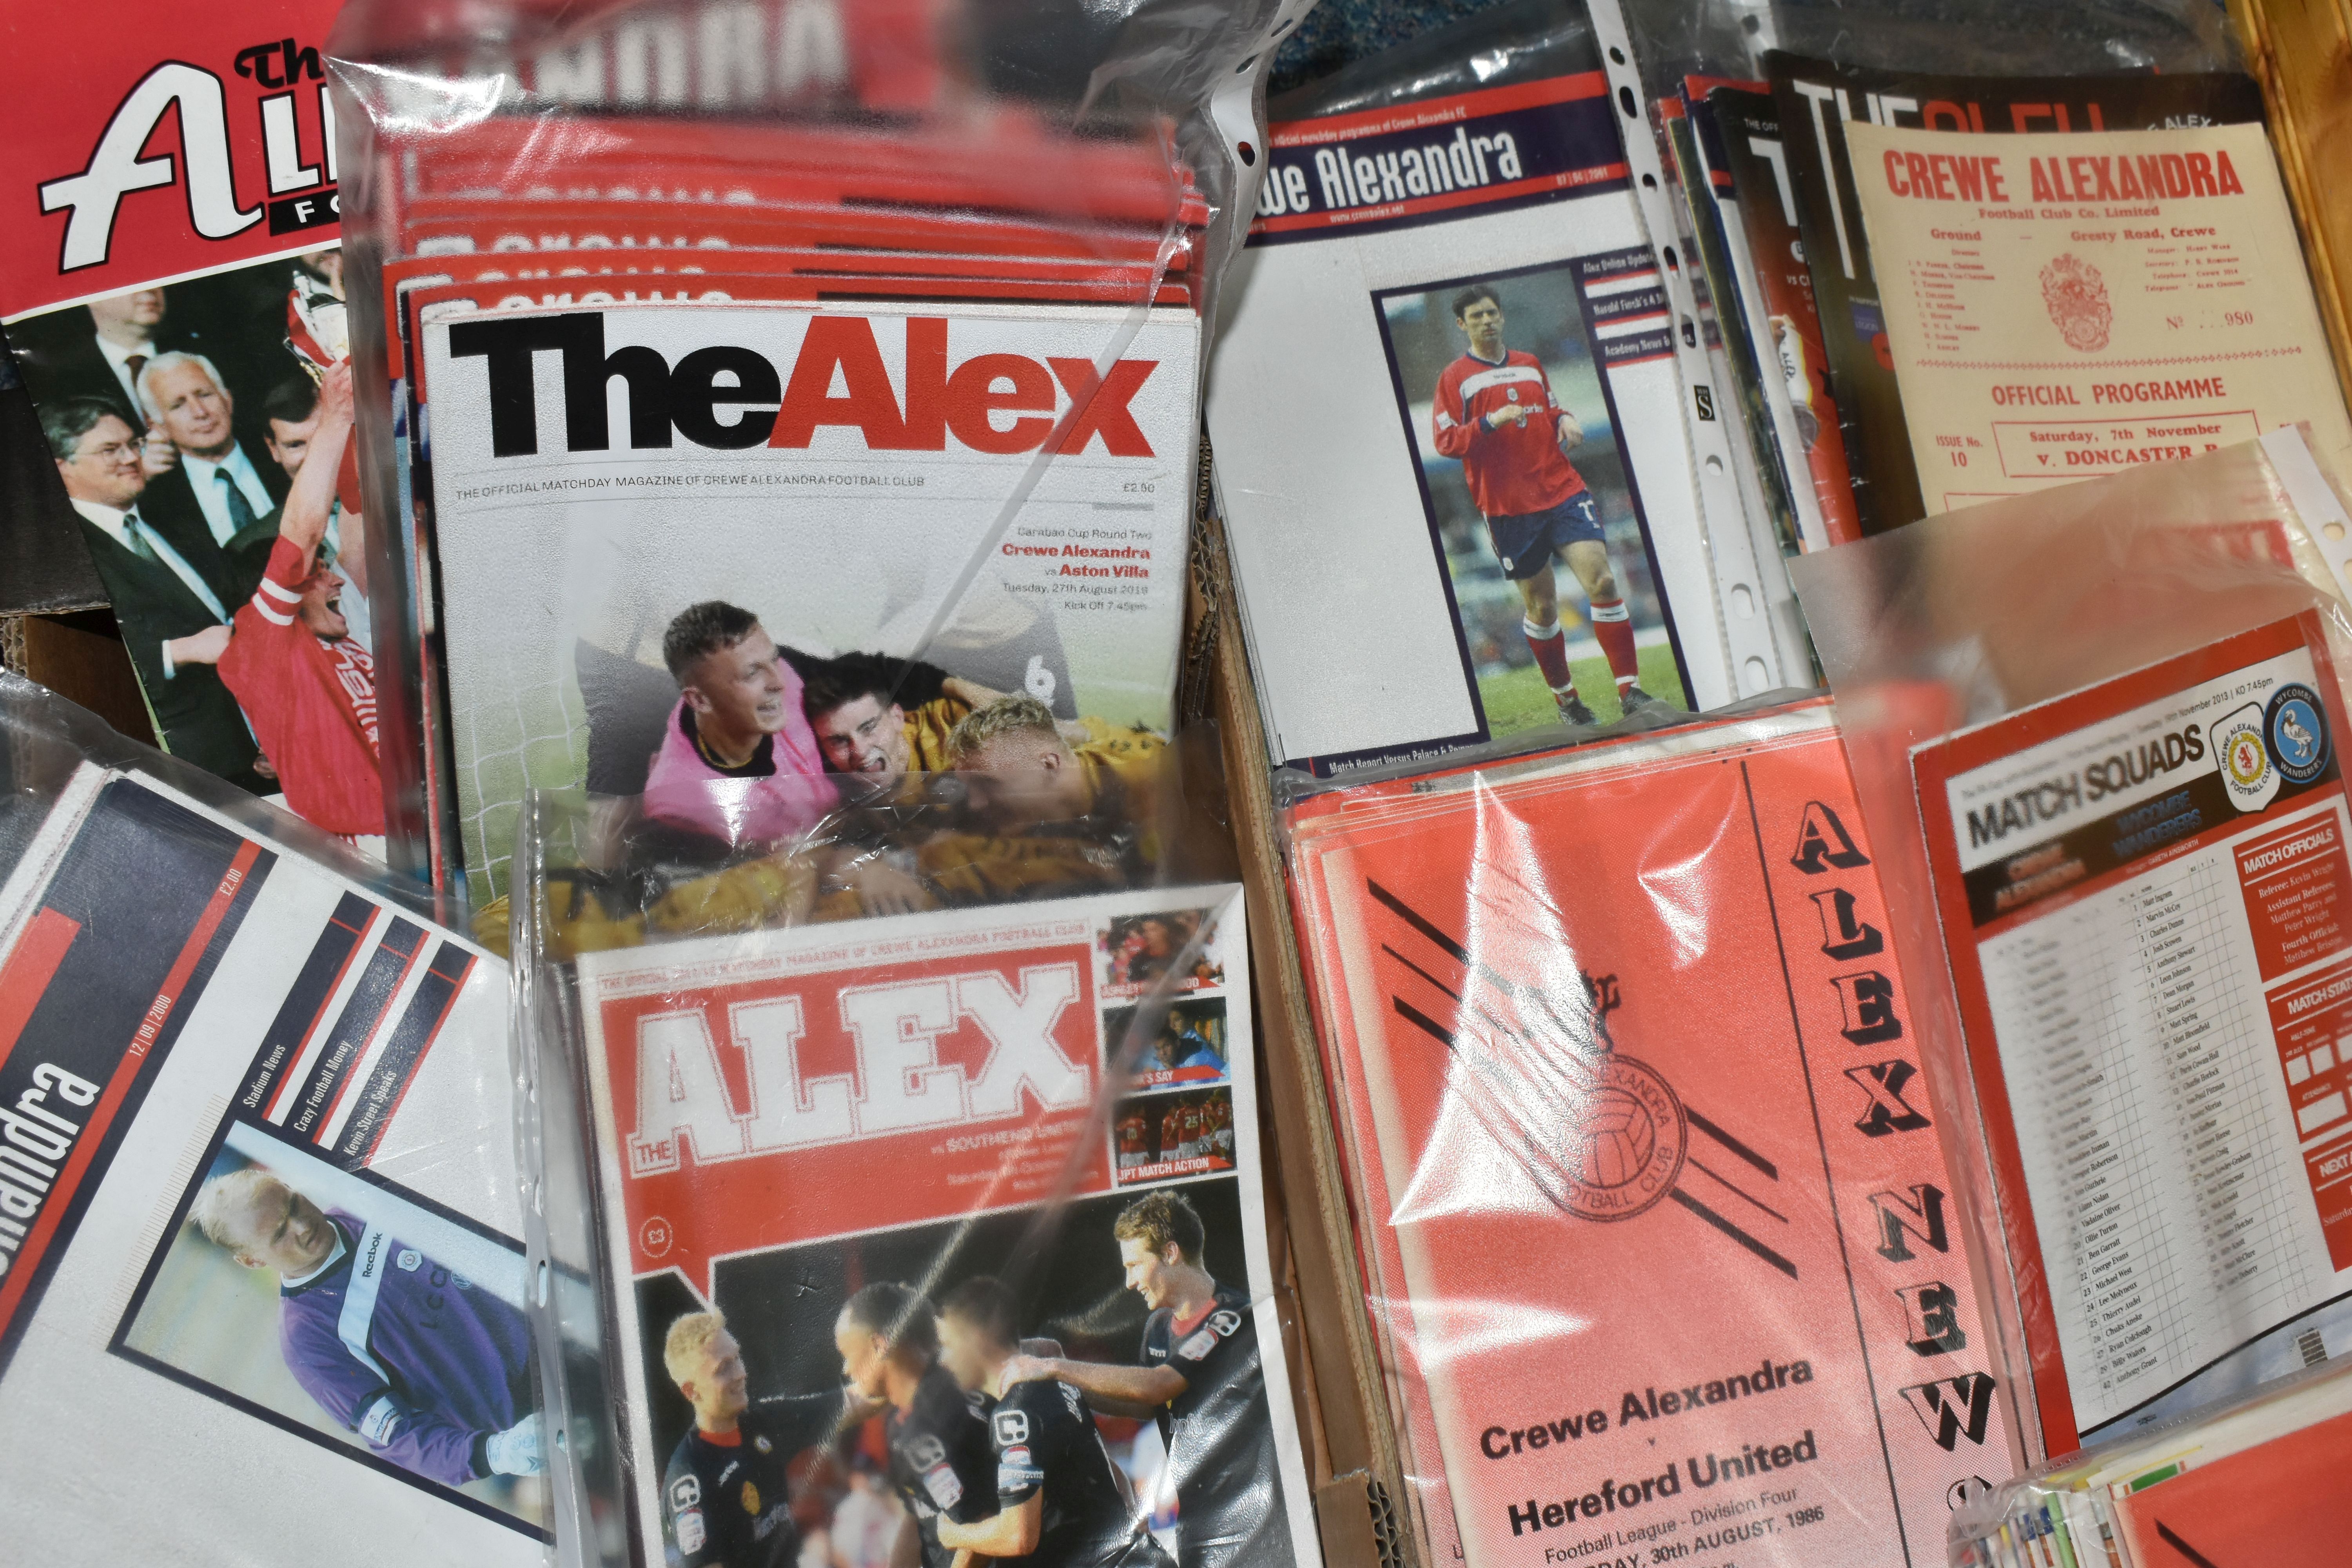 A COLLECTION OF CREWE ALEXANDRA FOOTBALL CLUB PROGRAMMES APPROXIMATELY 150 OVER VARIOUS DECADES, - Image 3 of 3